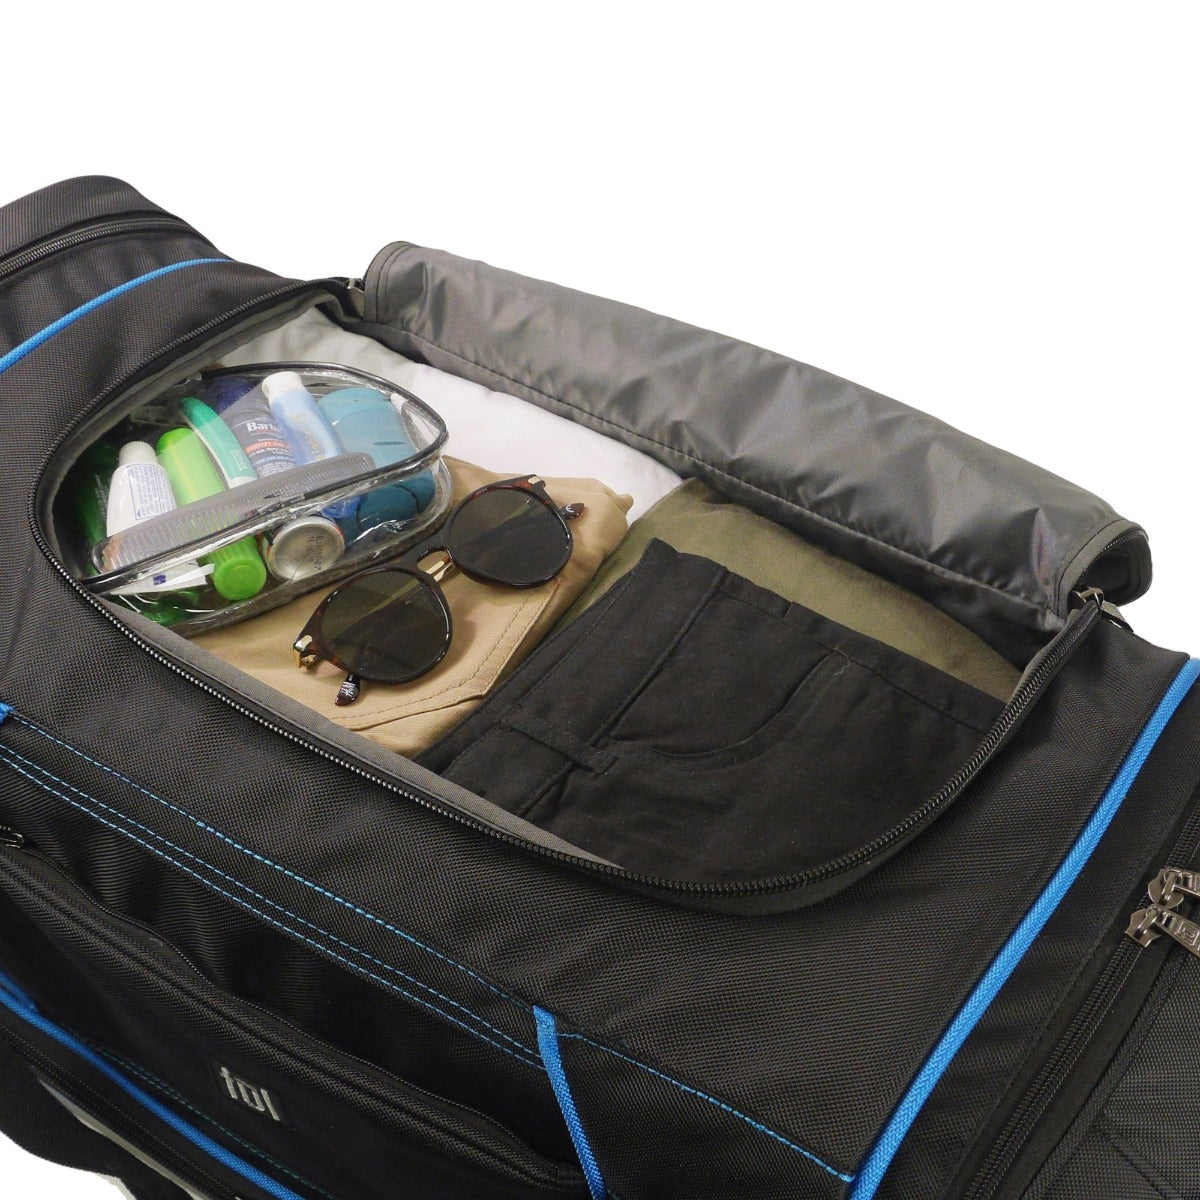 Ful Workhorse 30" oversized split level wheeled rolling duffle bag in black with blue details